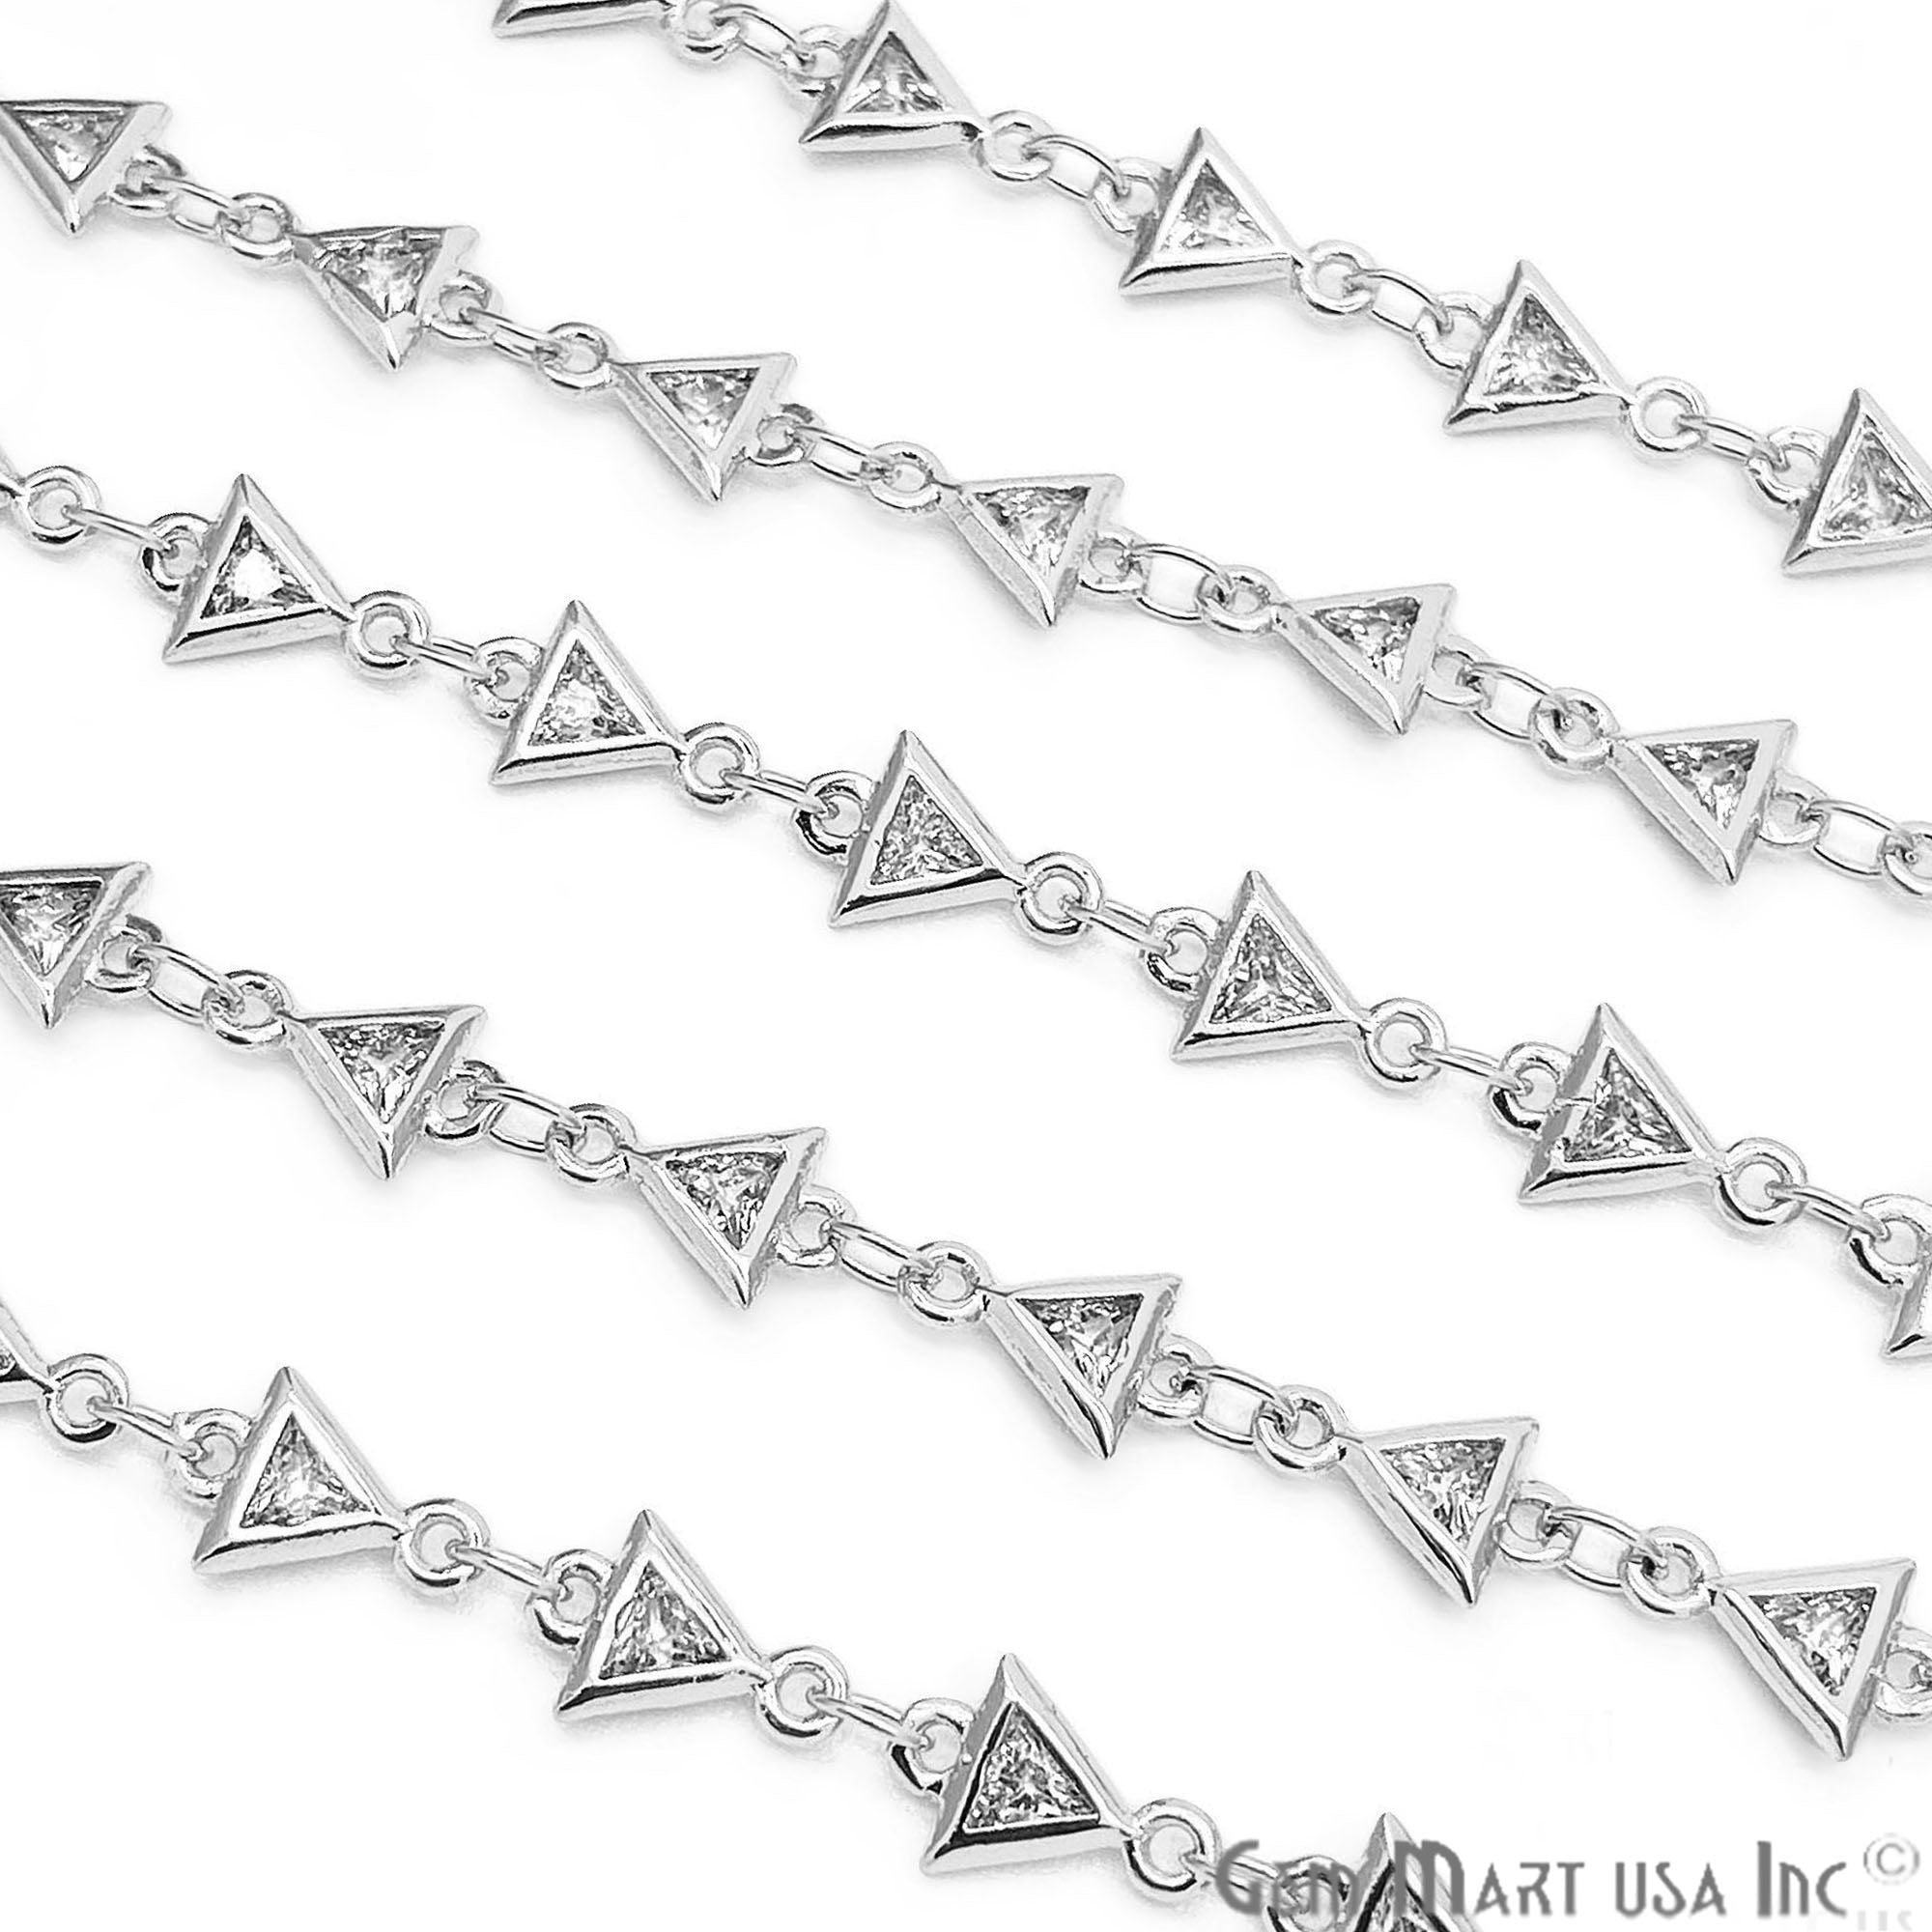 White Zircon TriAngel Shape 5x5mm Silver Plated Continuous Connector Chain - GemMartUSA